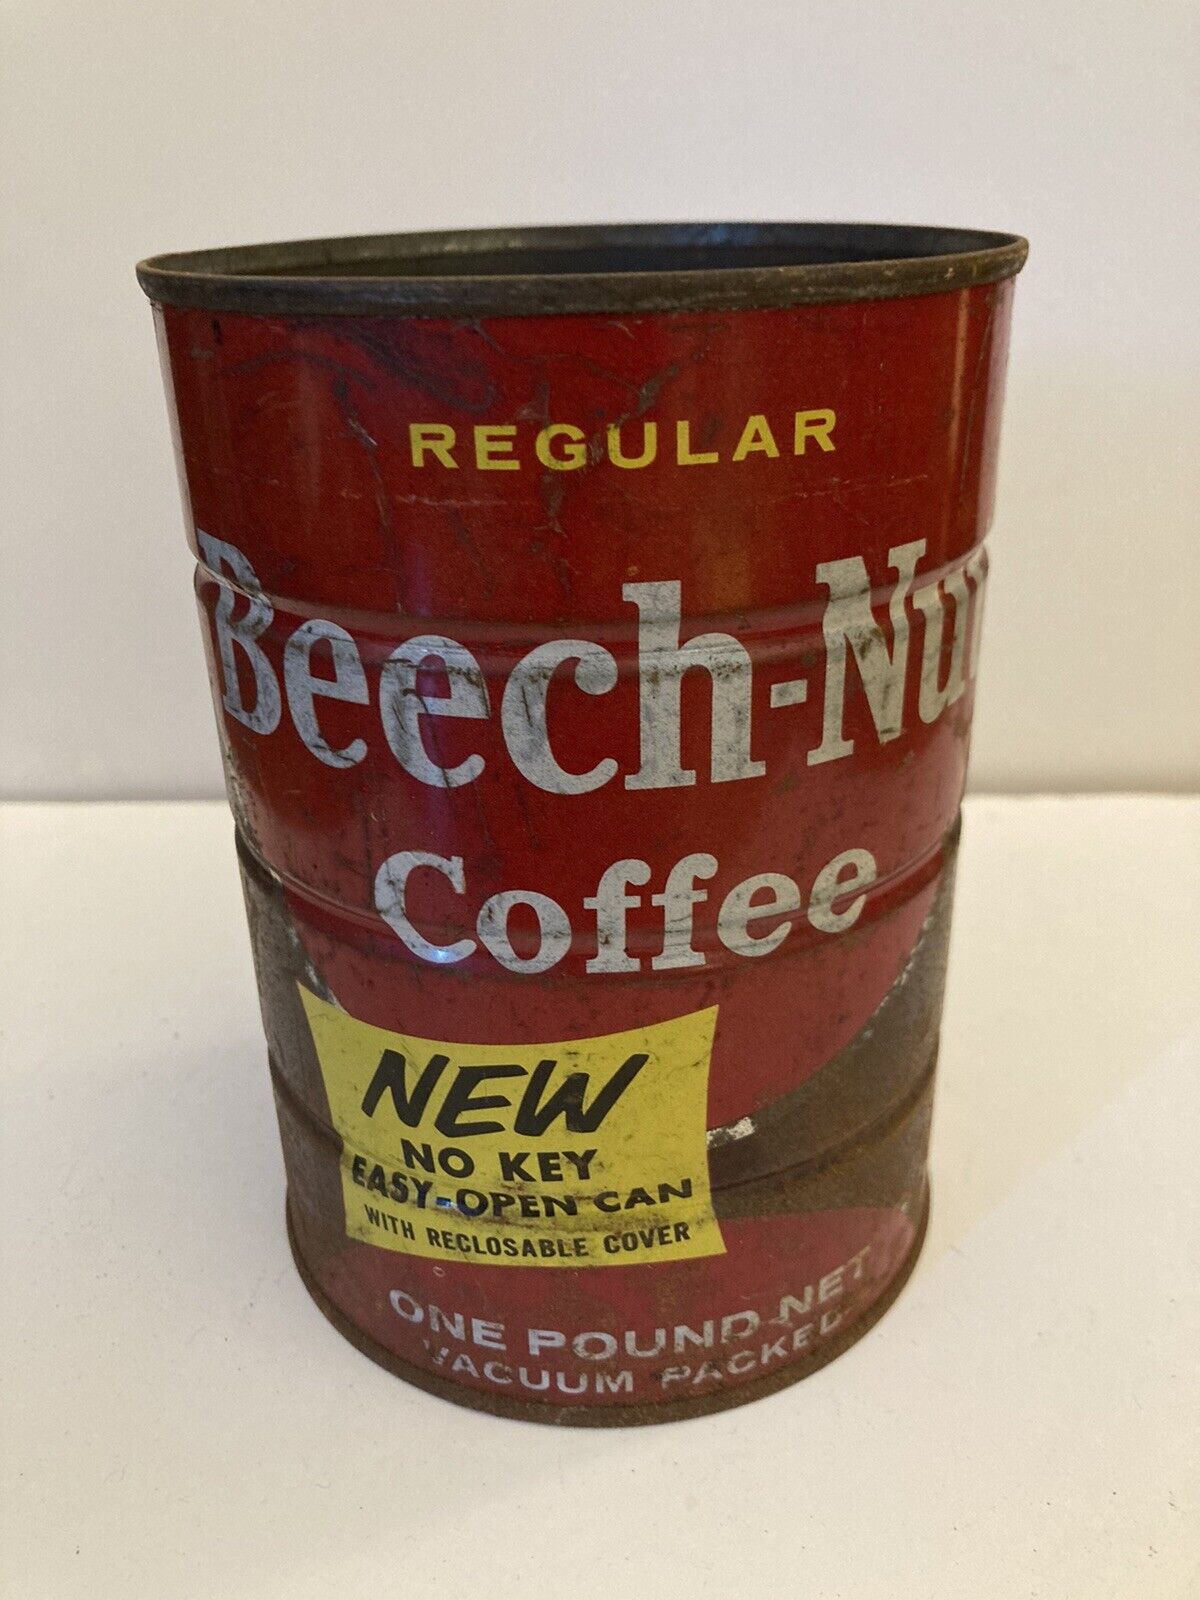 Vintage Coffee Can Beech-Nut Regular 1 Pound No Lid